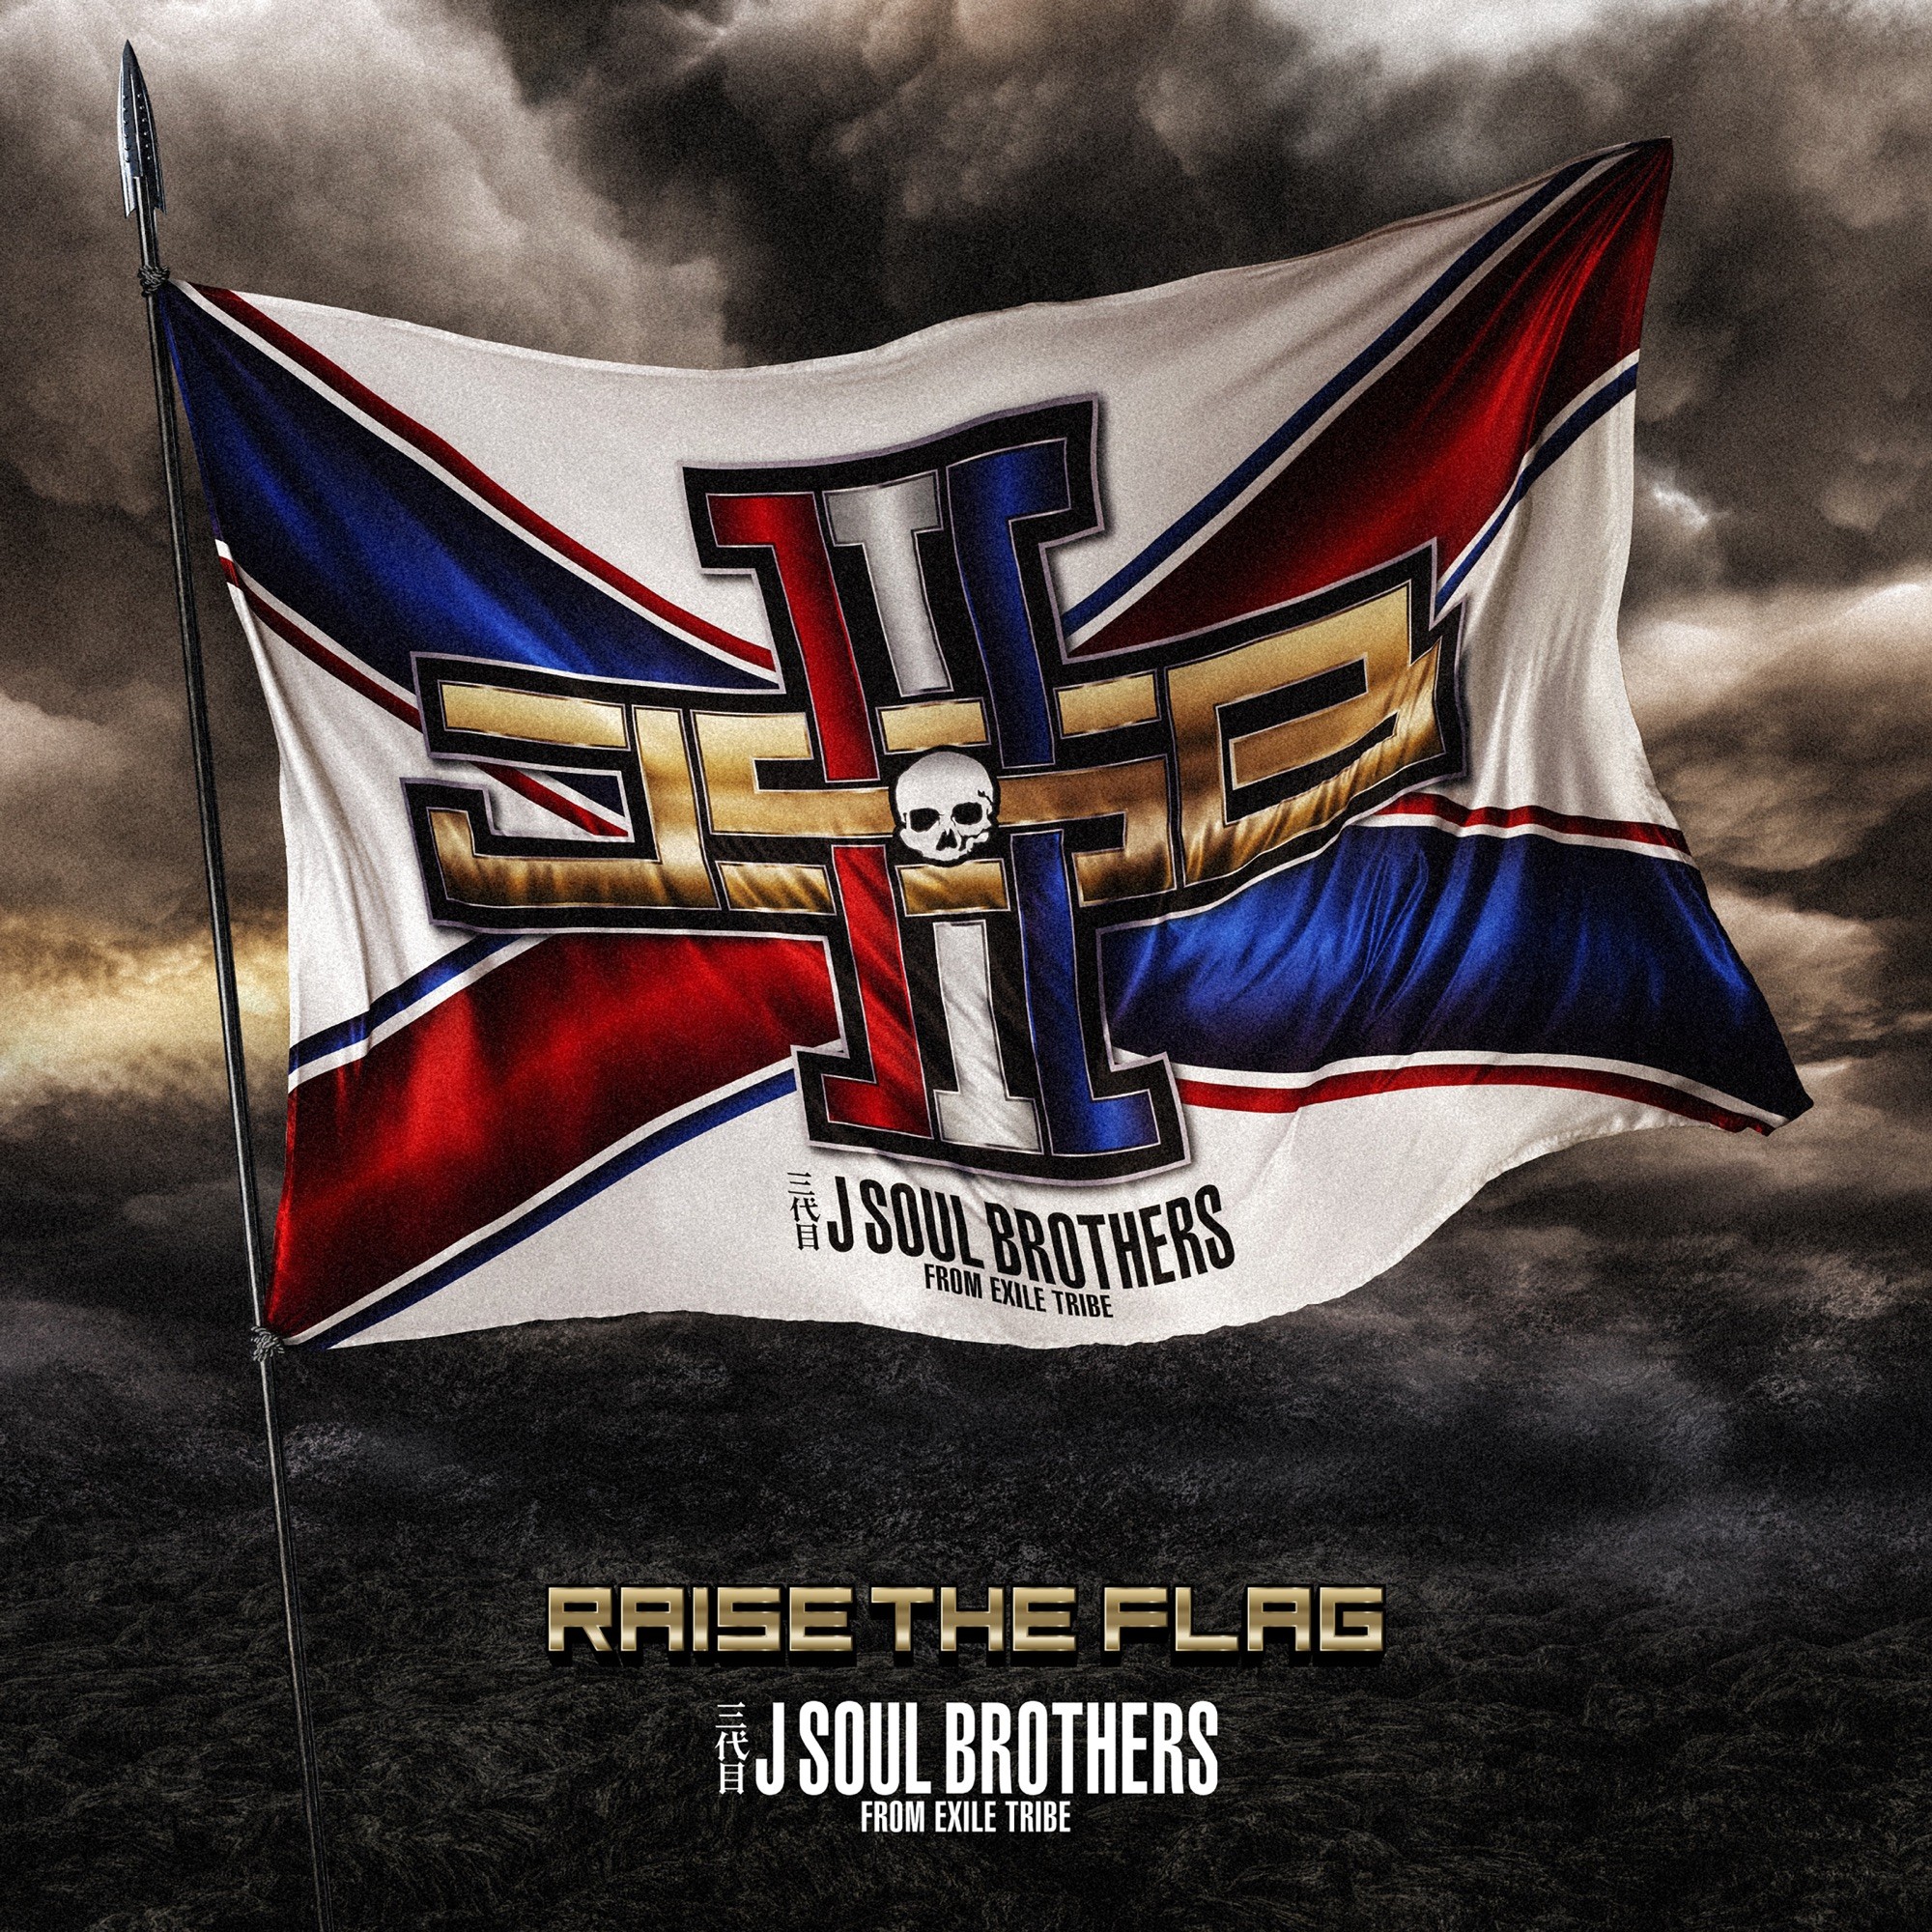 [Album] 三代目 J SOUL BROTHERS from EXILE TRIBE – RAISE THE FLAG [24bit Lossless + AAC 256 / WEB] [2020.03.18]